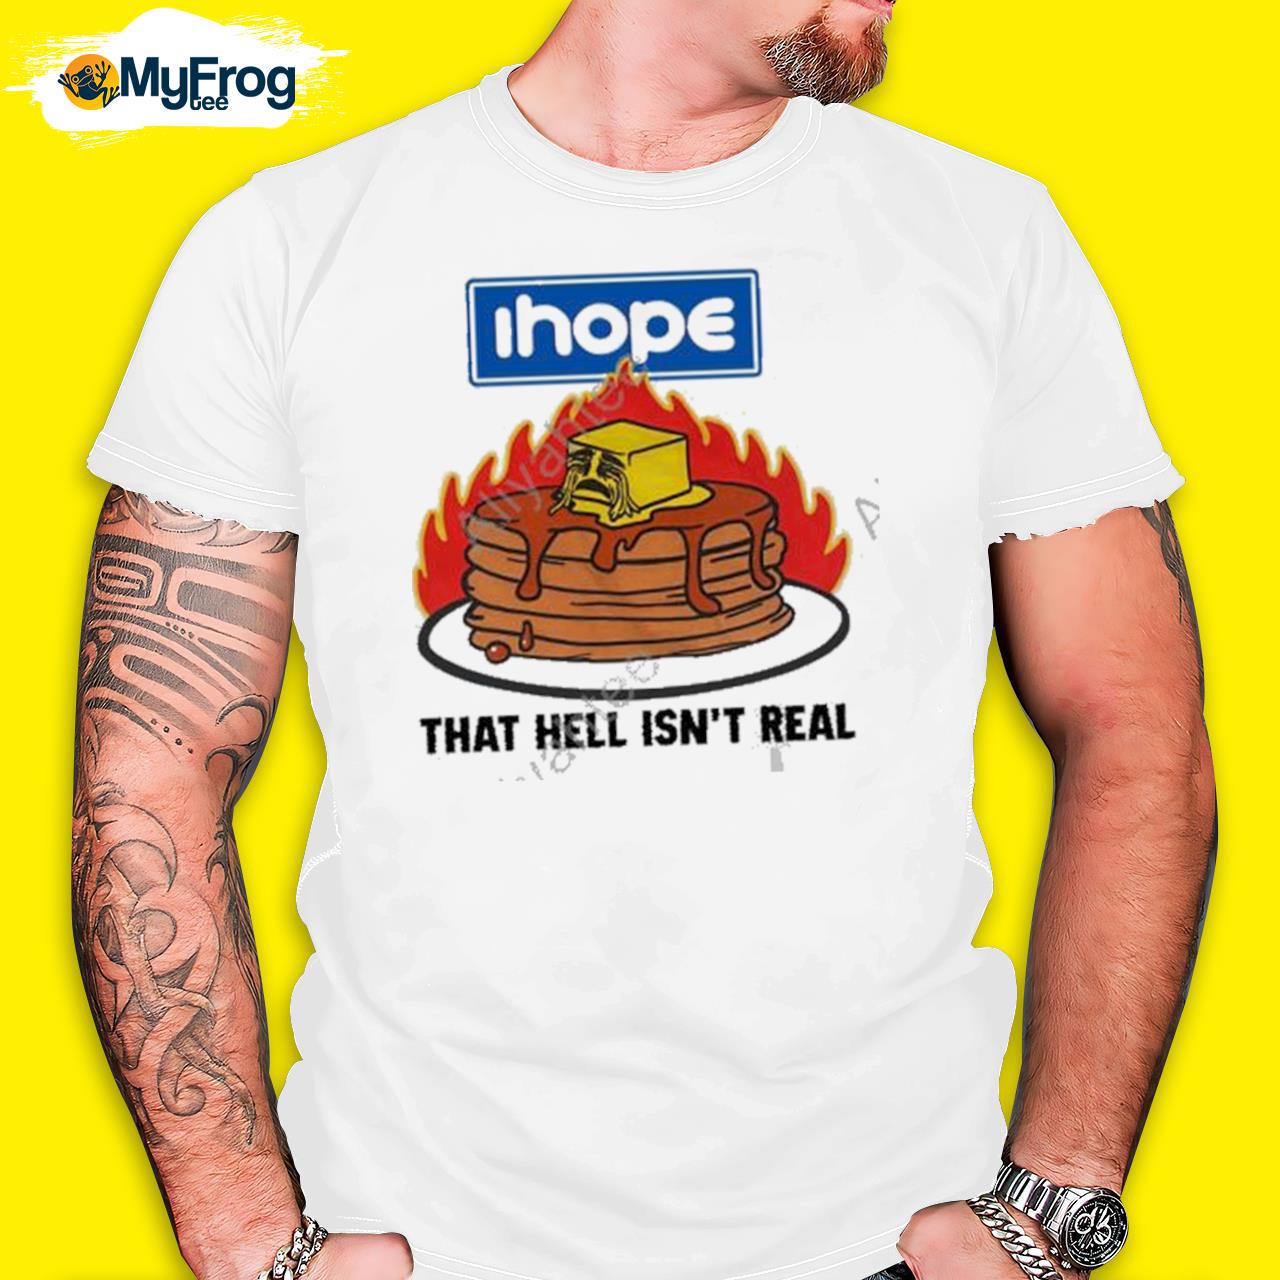 Thegoodshirts Store I Hope That Hell Isn't Real T Shirt